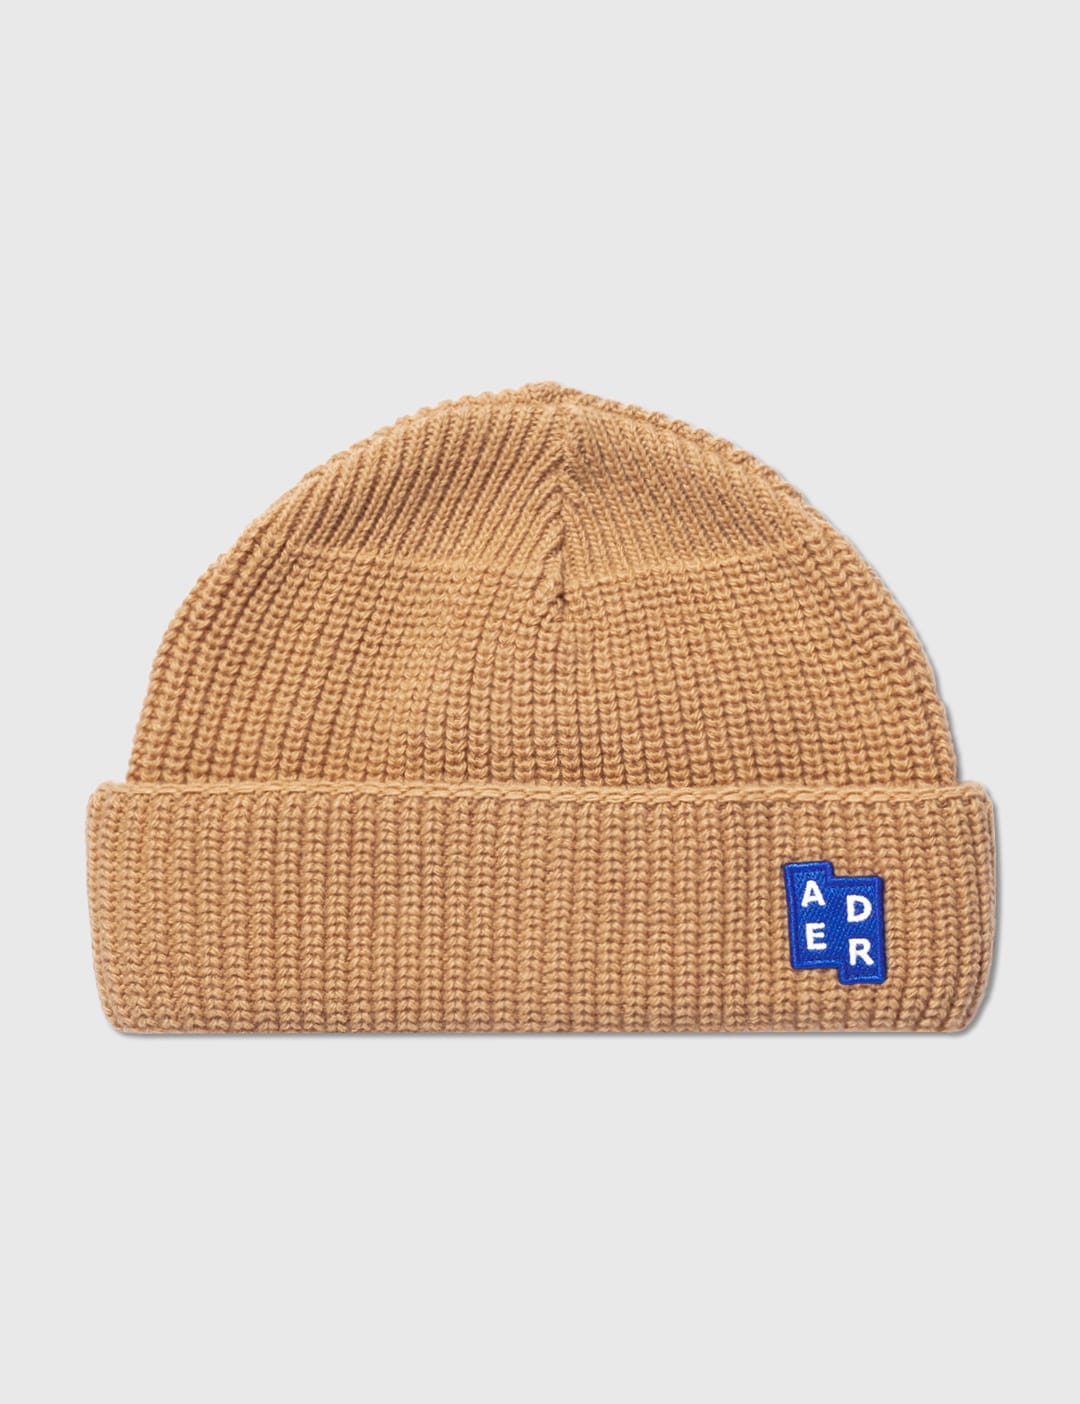 Ader Error - Logo Beanie | HBX - Globally Curated Fashion and Lifestyle by  Hypebeast